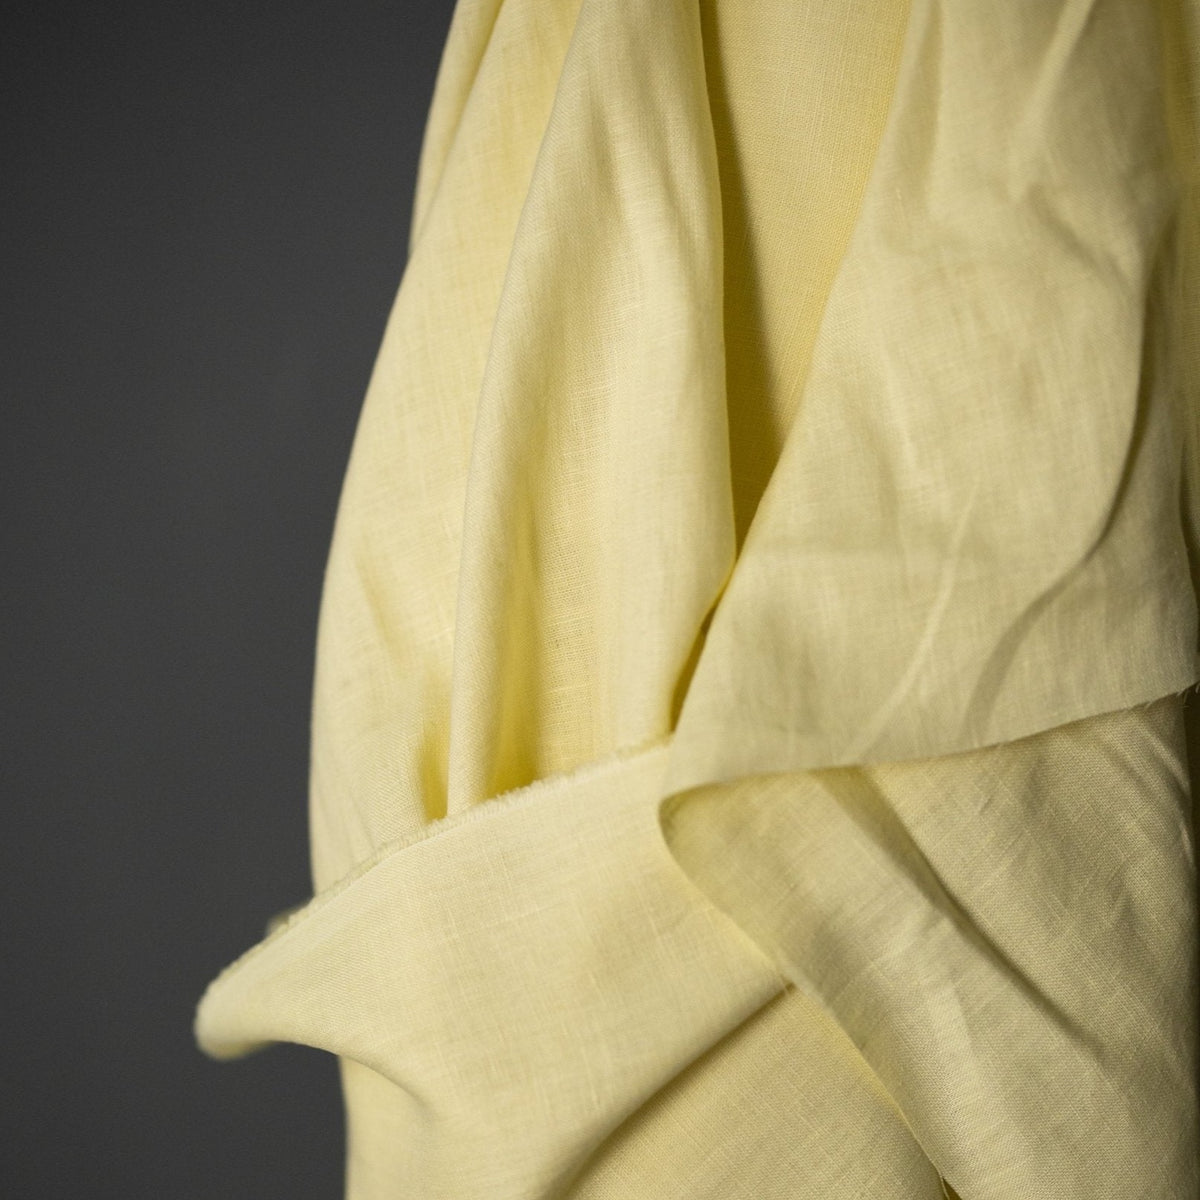 European Laundered Linen 185gsm in Powder Yellow | Merchant & Mills designer sewing fabric | Stitch Piece Loop | Online Fabric & Sewing Supplies | A carefully curated range   focusing on ethically produced & sustainable fabrics of the highest quality, perfect for the modern & considered sewist’s memade wardrobe | Australia